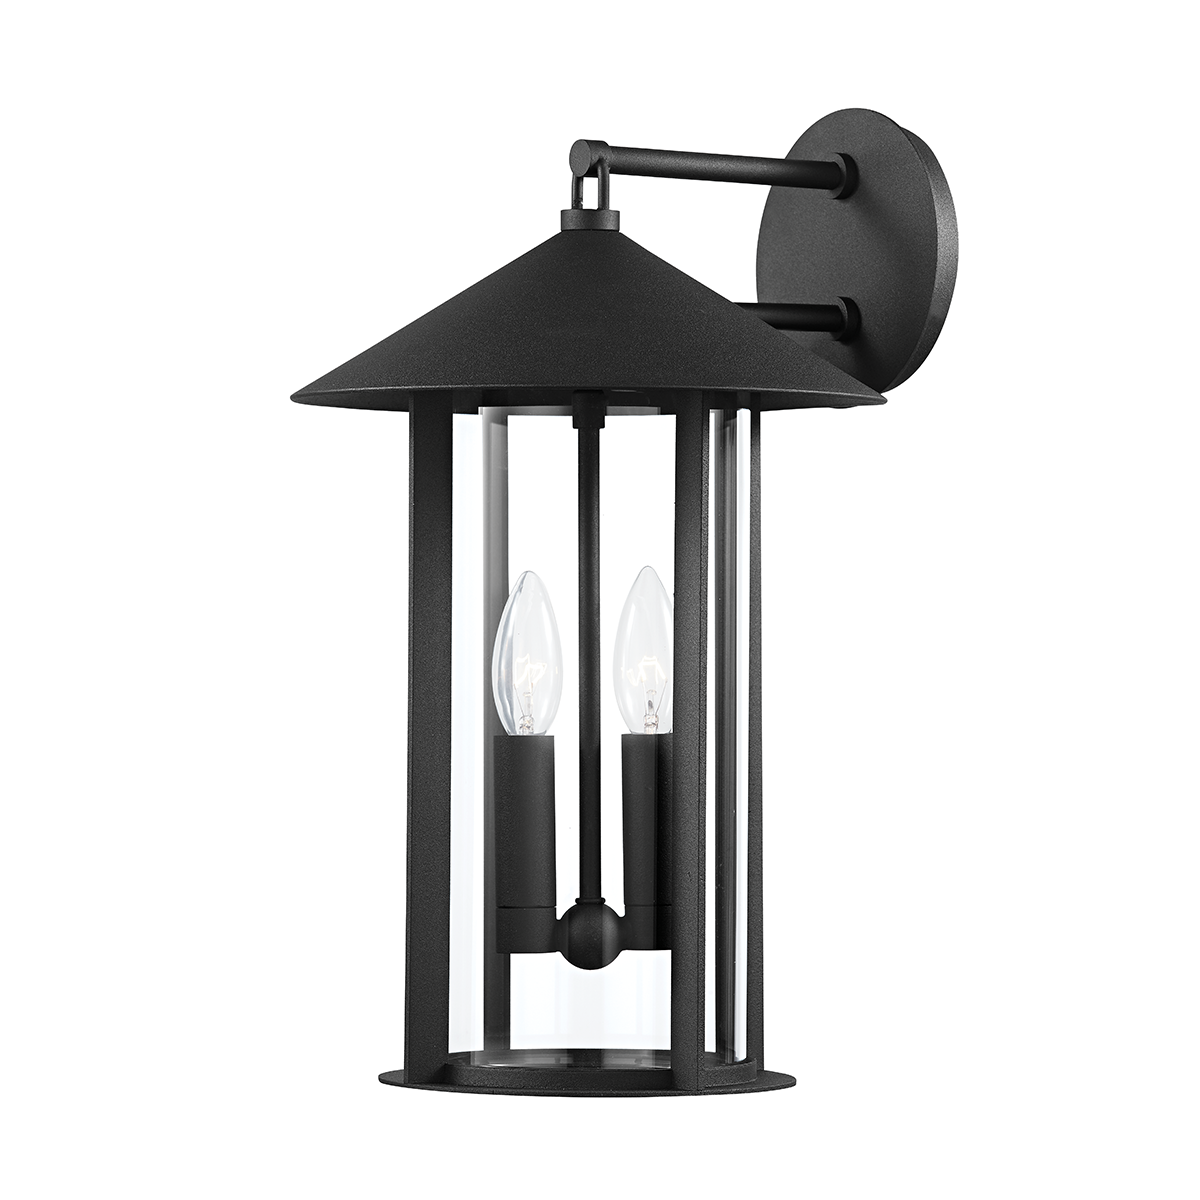 Troy Lighting 2 LIGHT EXTERIOR WALL SCONCE B1952 Outdoor l Wall Troy Lighting TEXTURE BLACK  